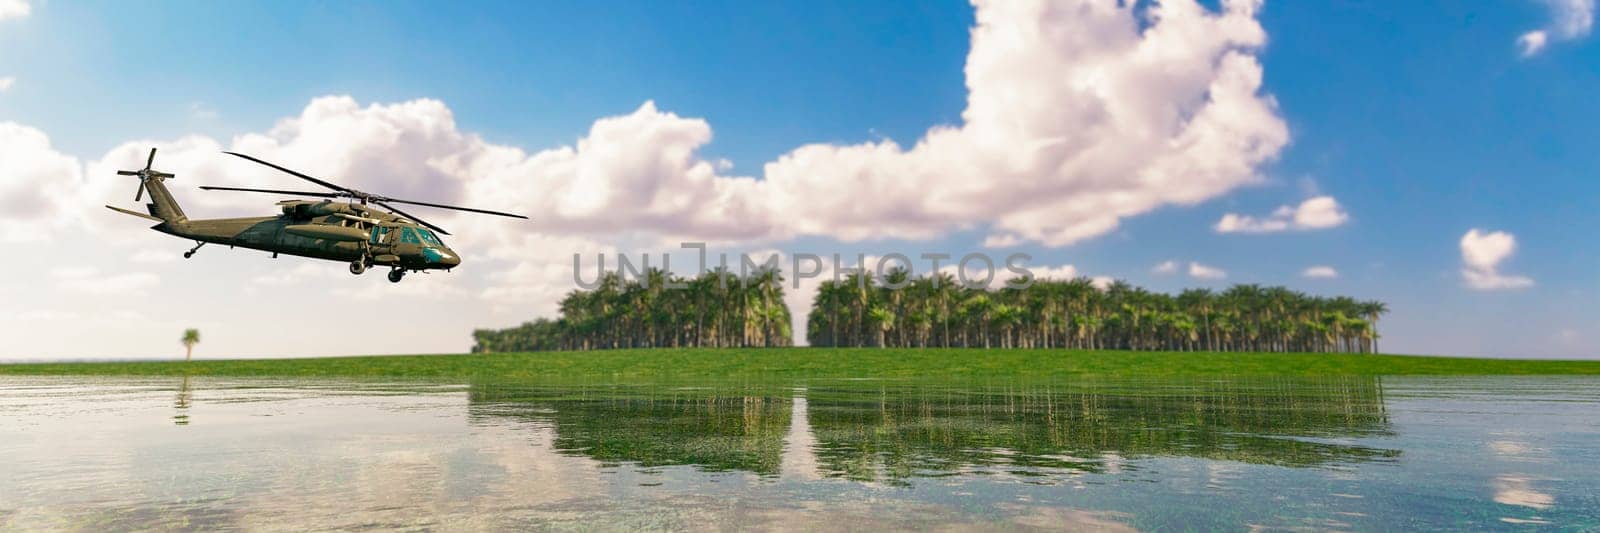 A military helicopter flies low over tranquil waters reflecting palm trees under a soft cloudy sky.